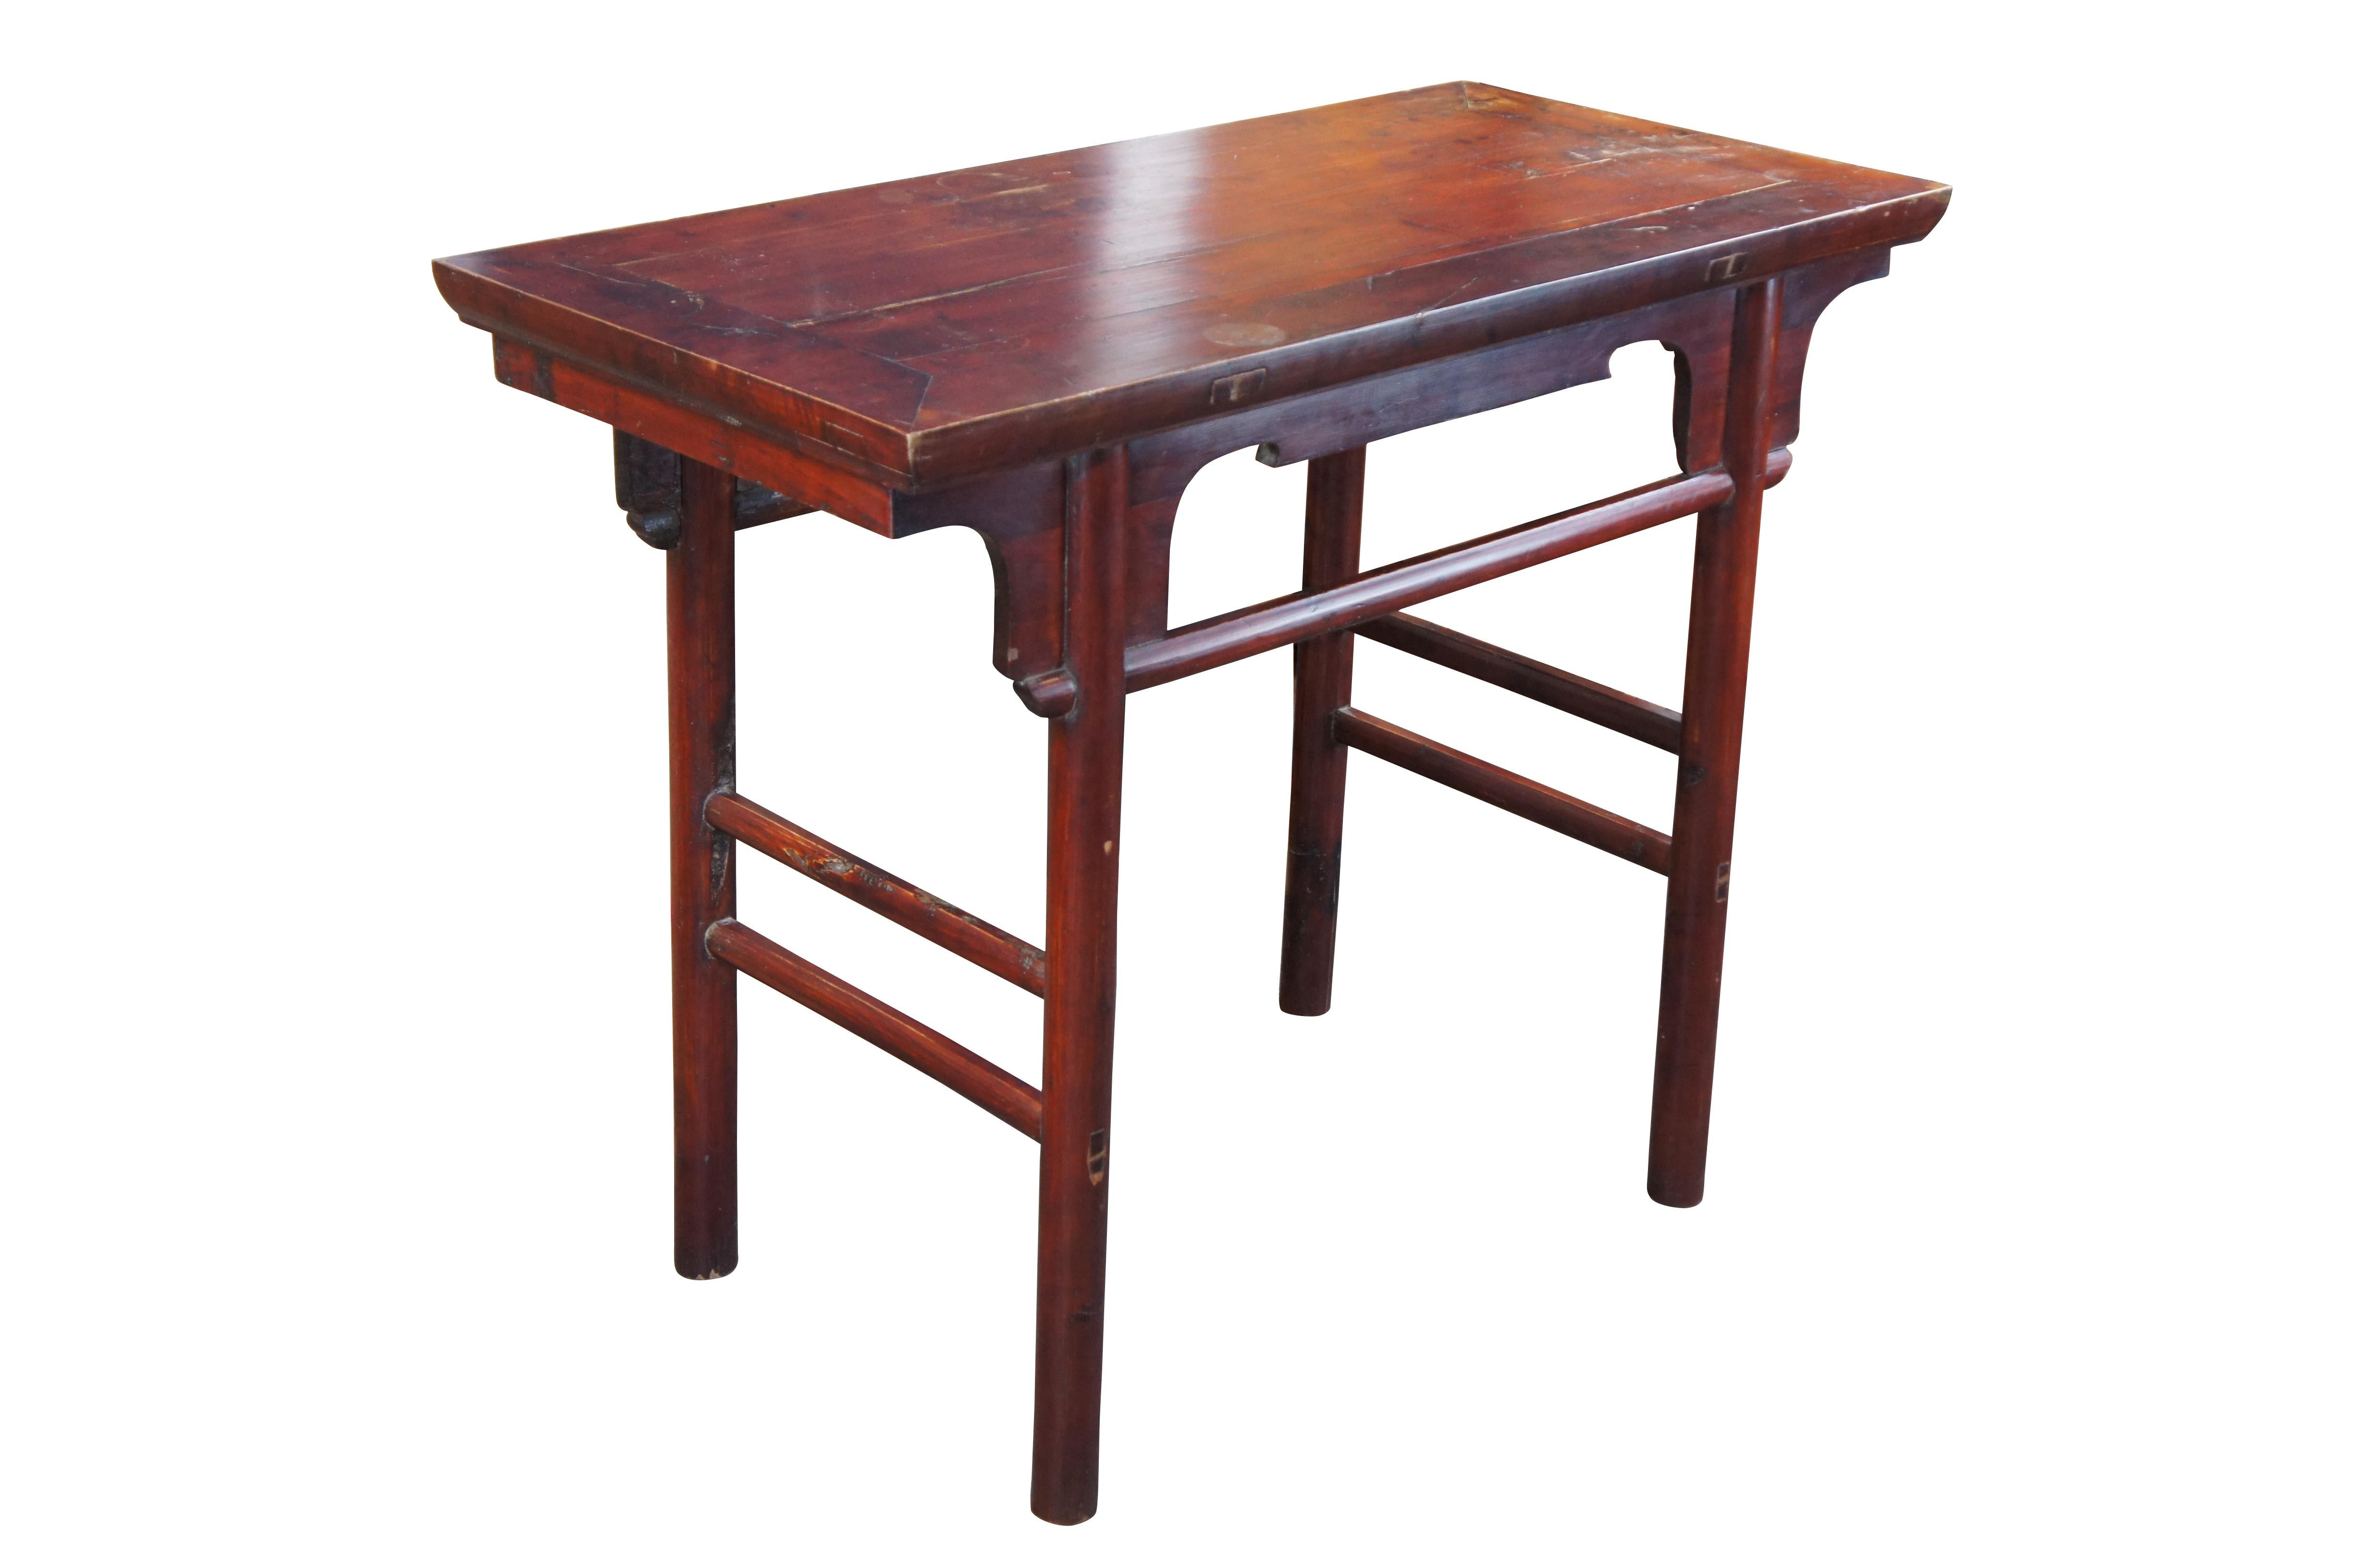 An antique 19th Century Chinese Qing Dynasty (Ming Style) Altar Table. Made from elm with traditional mortise and tenon construction. Features a shapely apron and contoured spandrels over long legs connected by stretchers from front to back. Finish